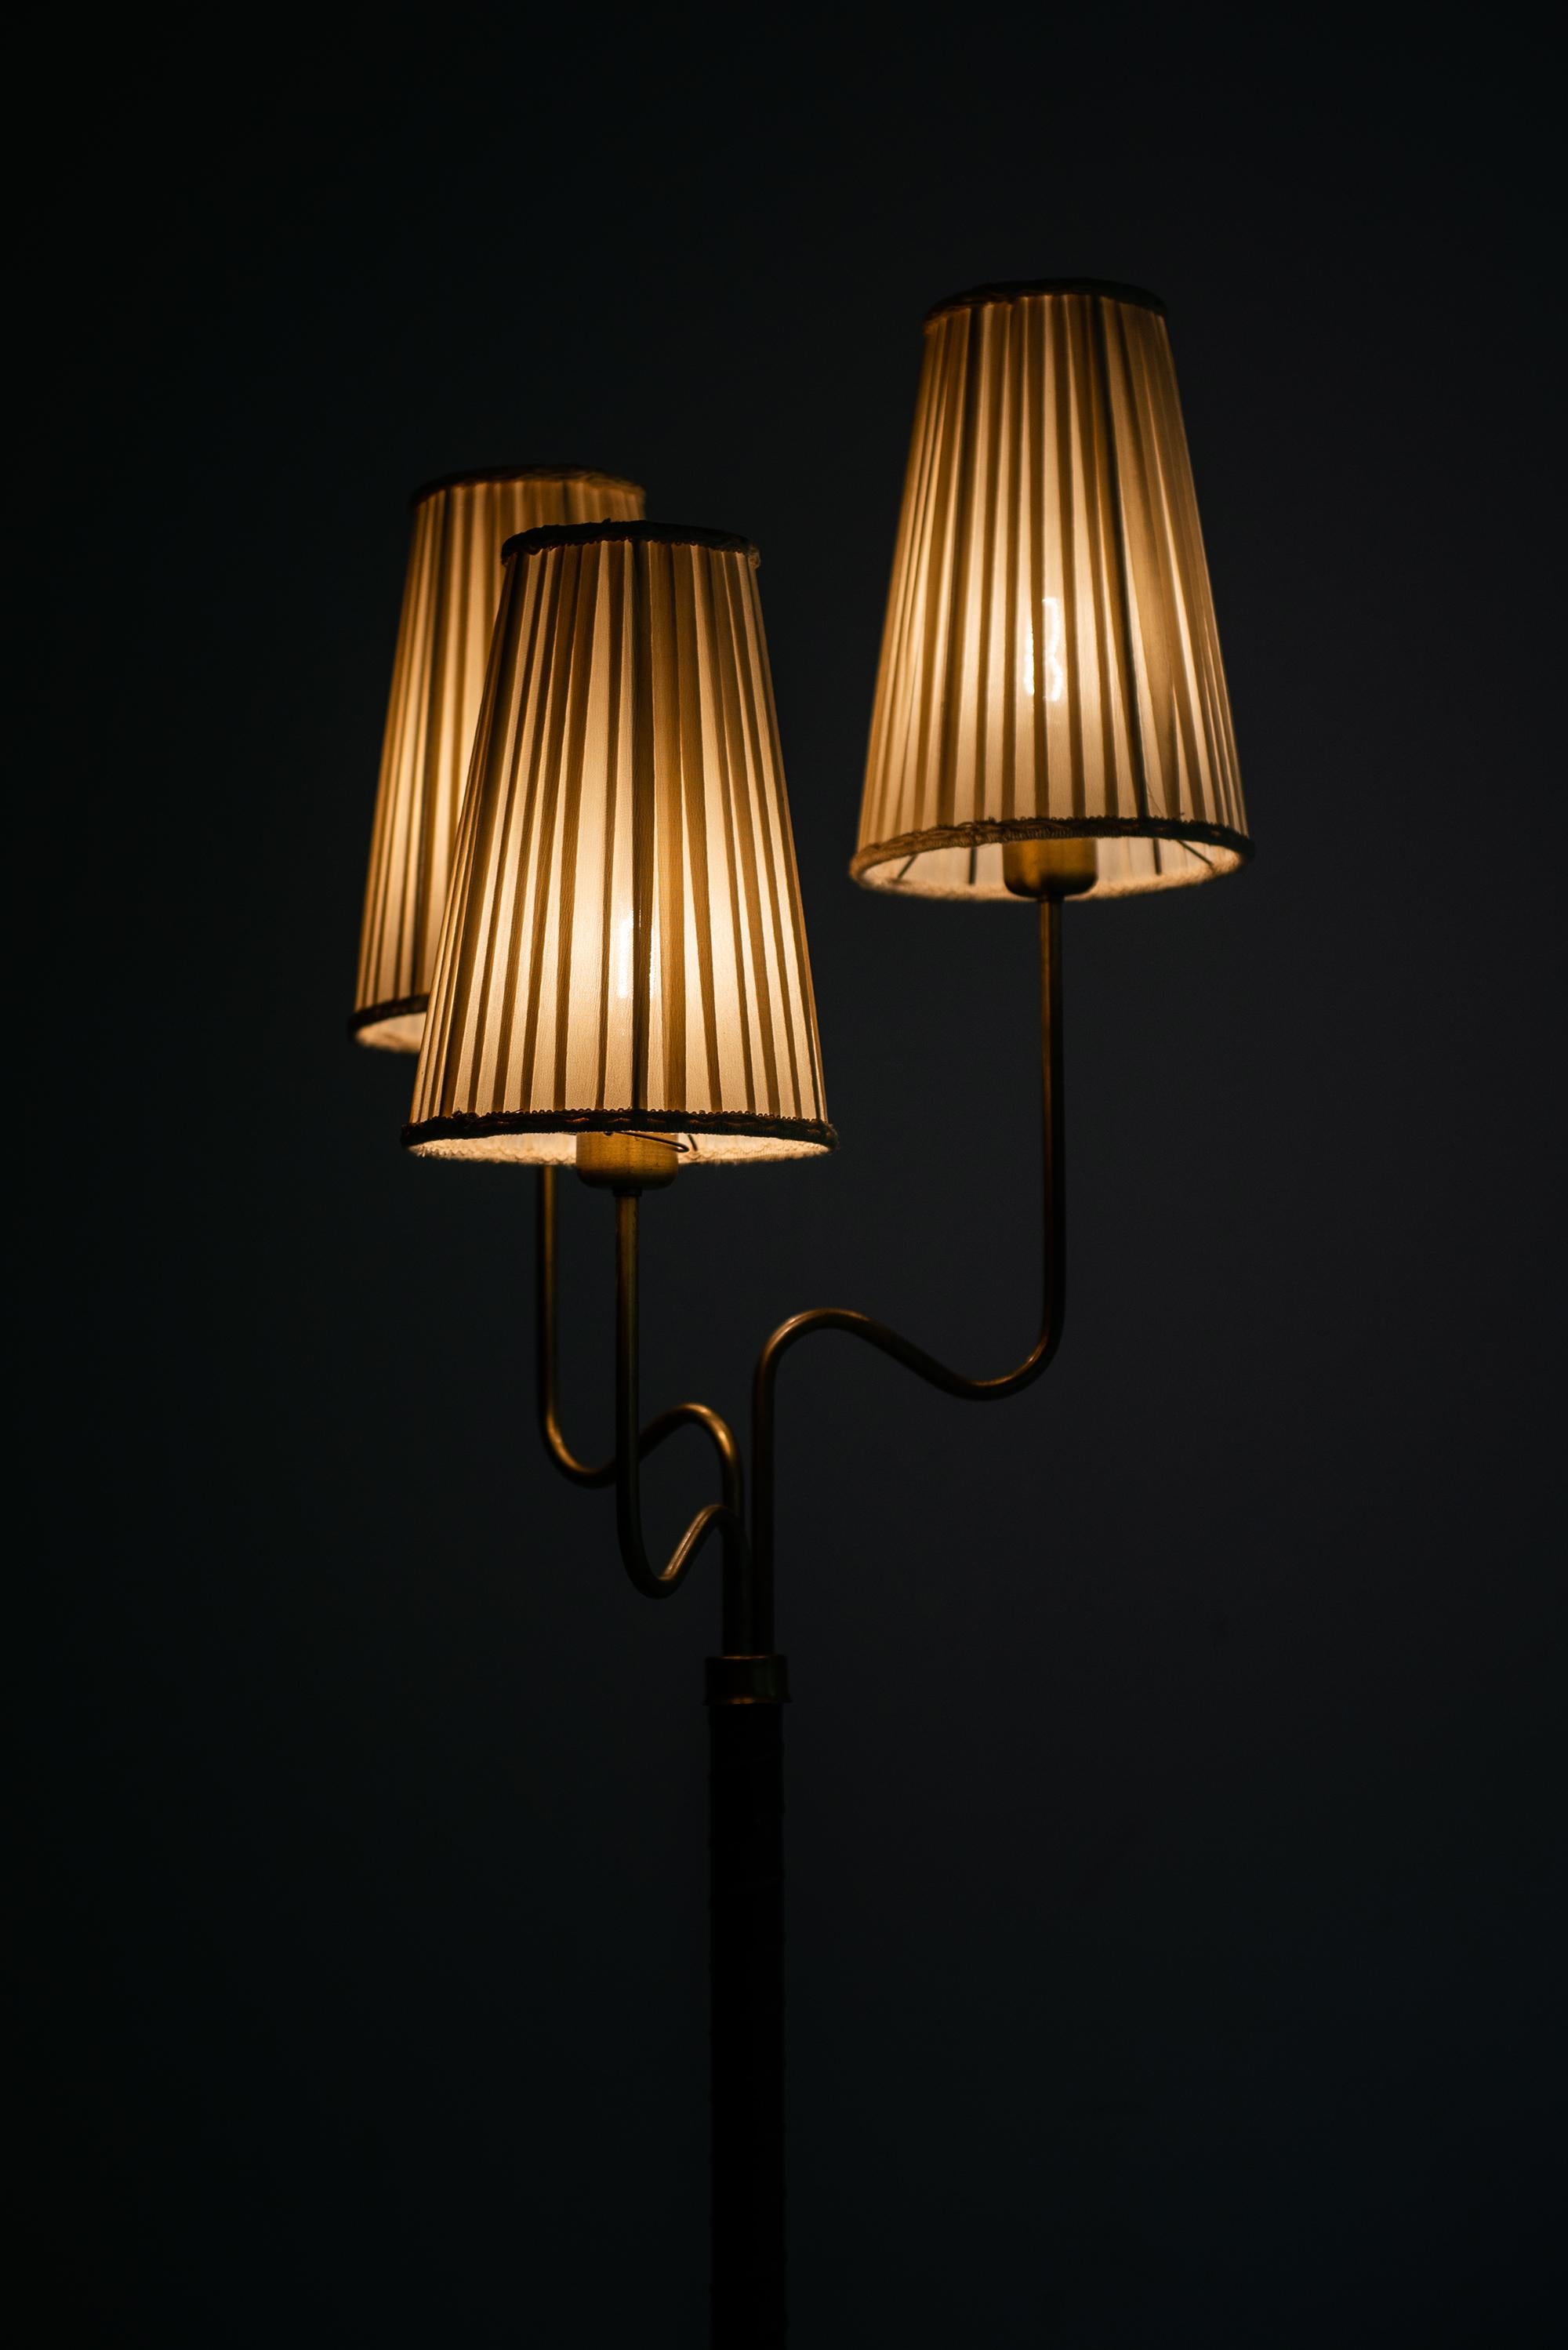 Brass Hans Bergström Floor Lamp with 3 Arms Produced by ASEA in Sweden